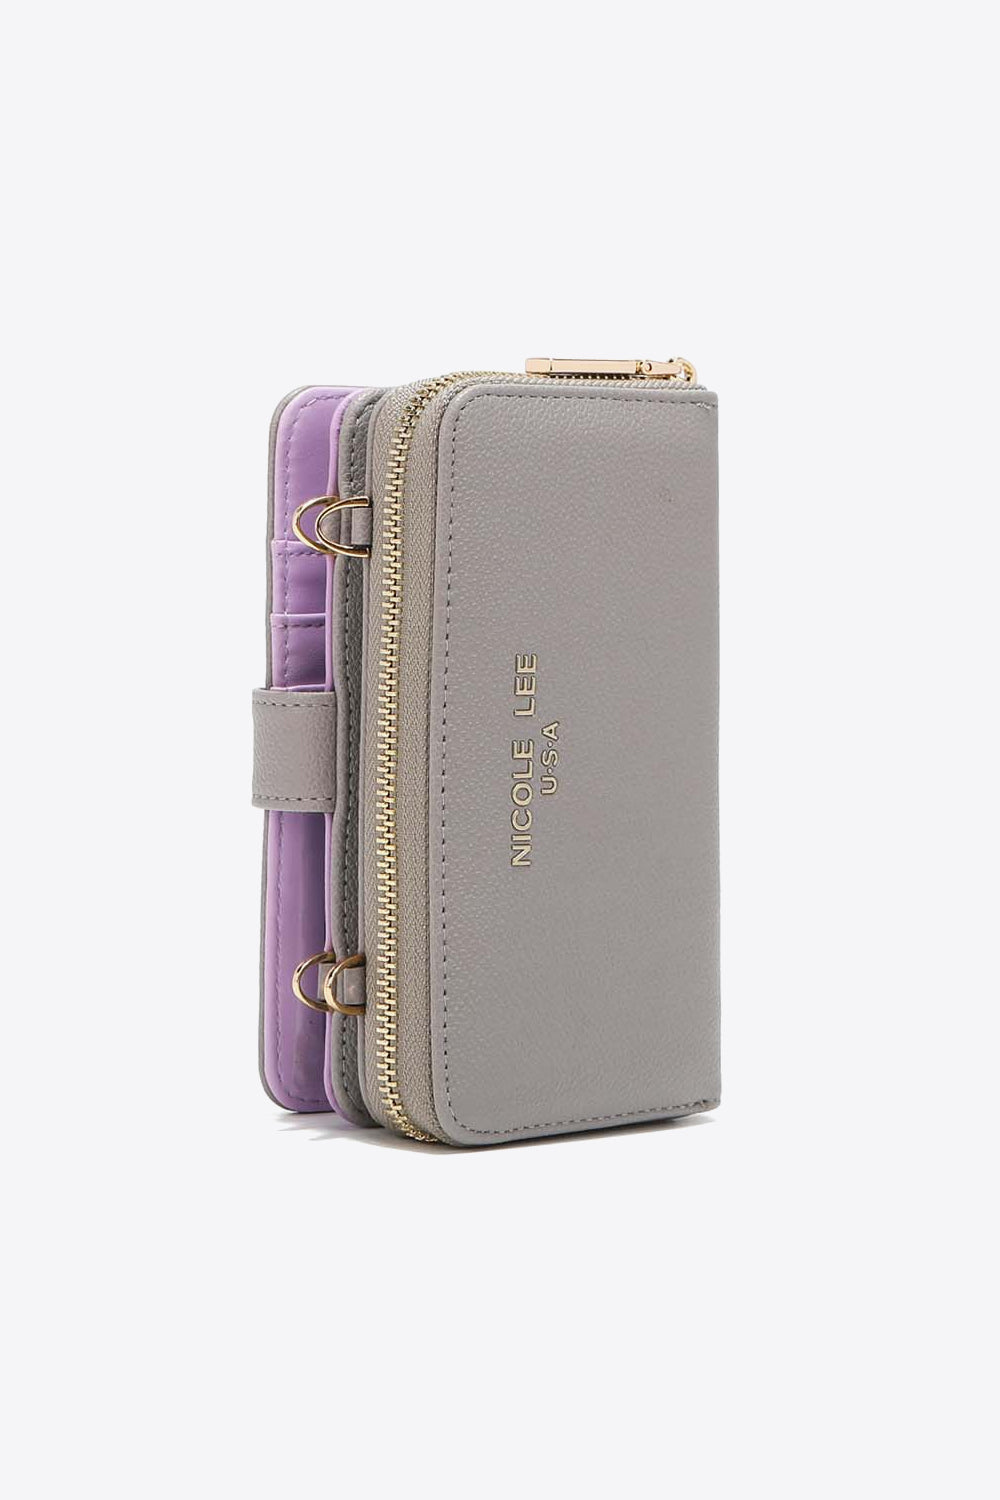 Nicole Lee - Shipped from USA - Two-Piece Crossbody Phone Case Wallet - Premium Two-Piece Crossbody Phone Case Wallet from Concordia Style Boutique - Just $28.90! Shop now at Concordia Style Boutique